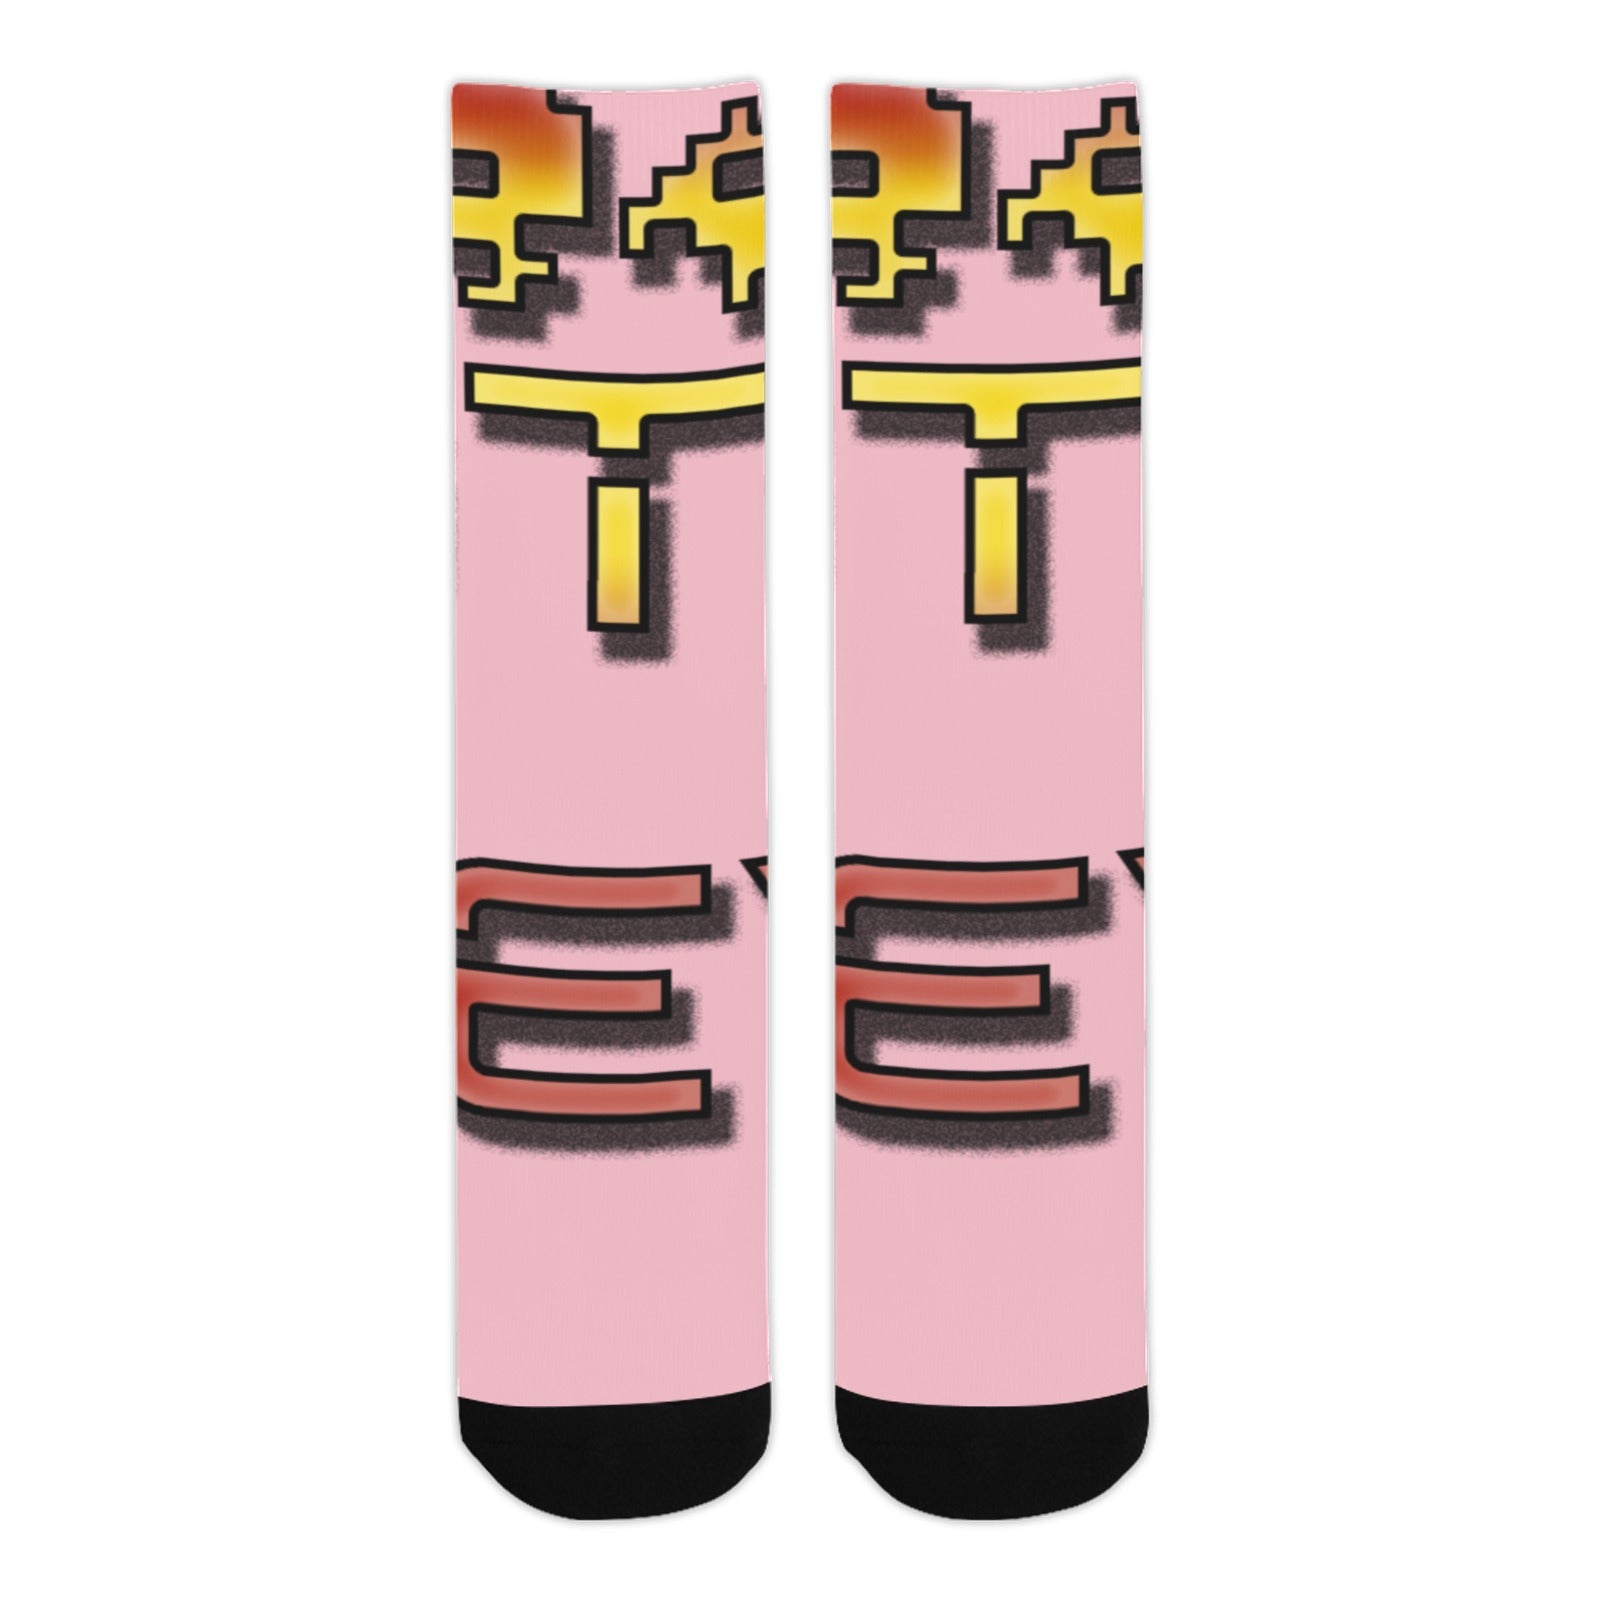 fz unisex socks - red one size / fz socks -pink sublimated crew socks(made in usa)